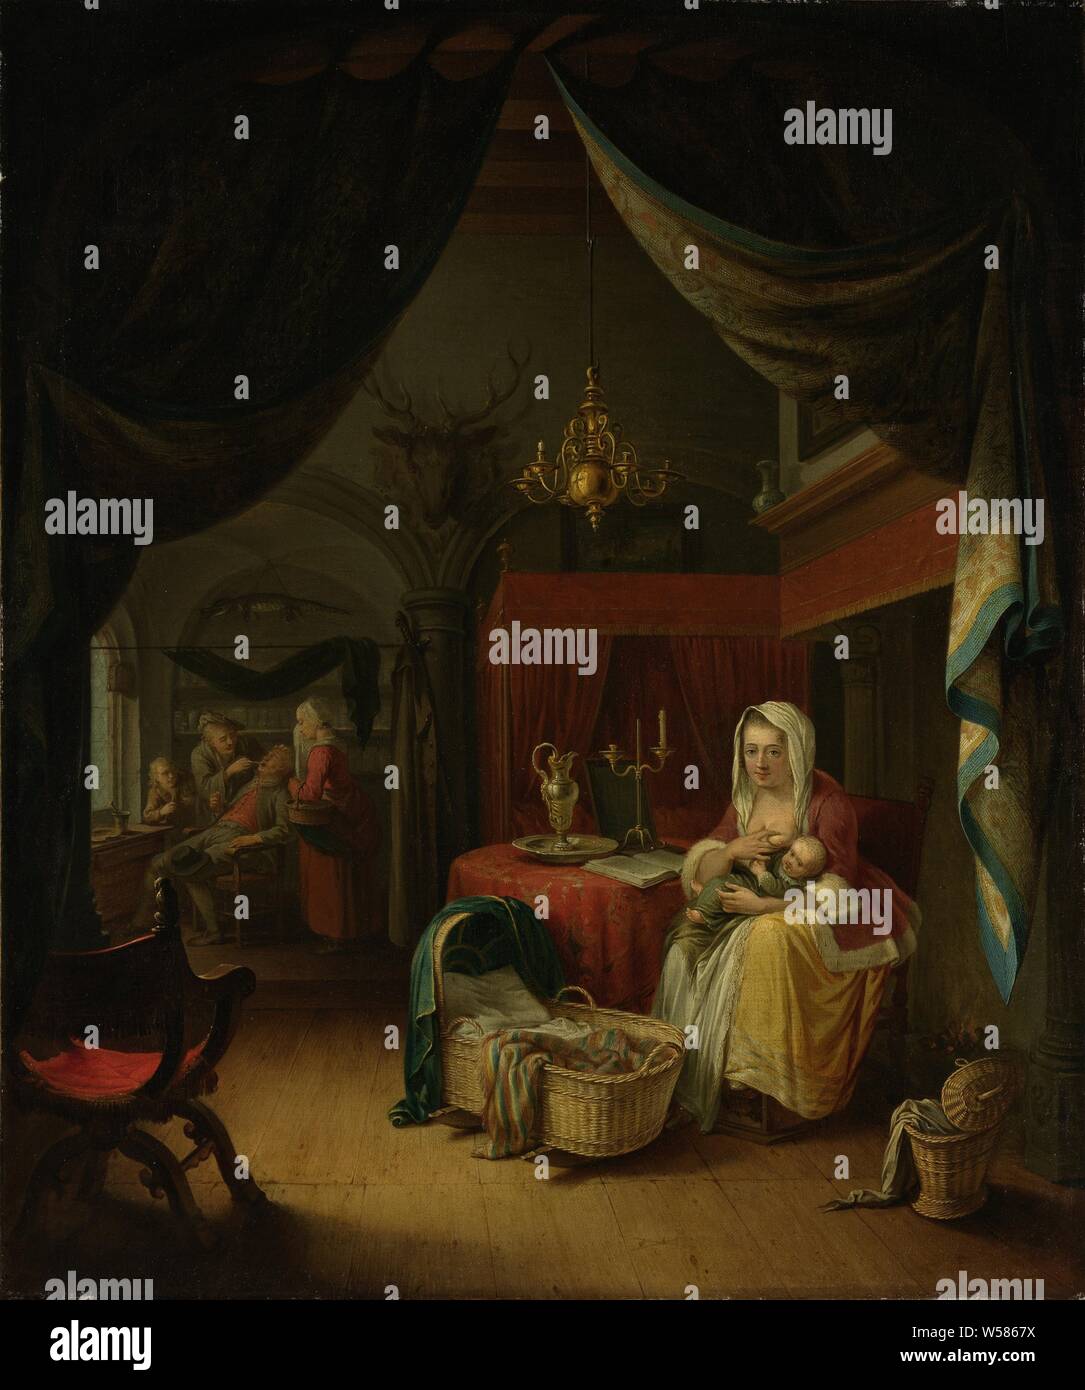 Triptych: Allegory of Art Training, Triptych with an allegory of art  education. A delivery room on the center panel, a woman is breastfeeding a  child. She is seated at a table, the